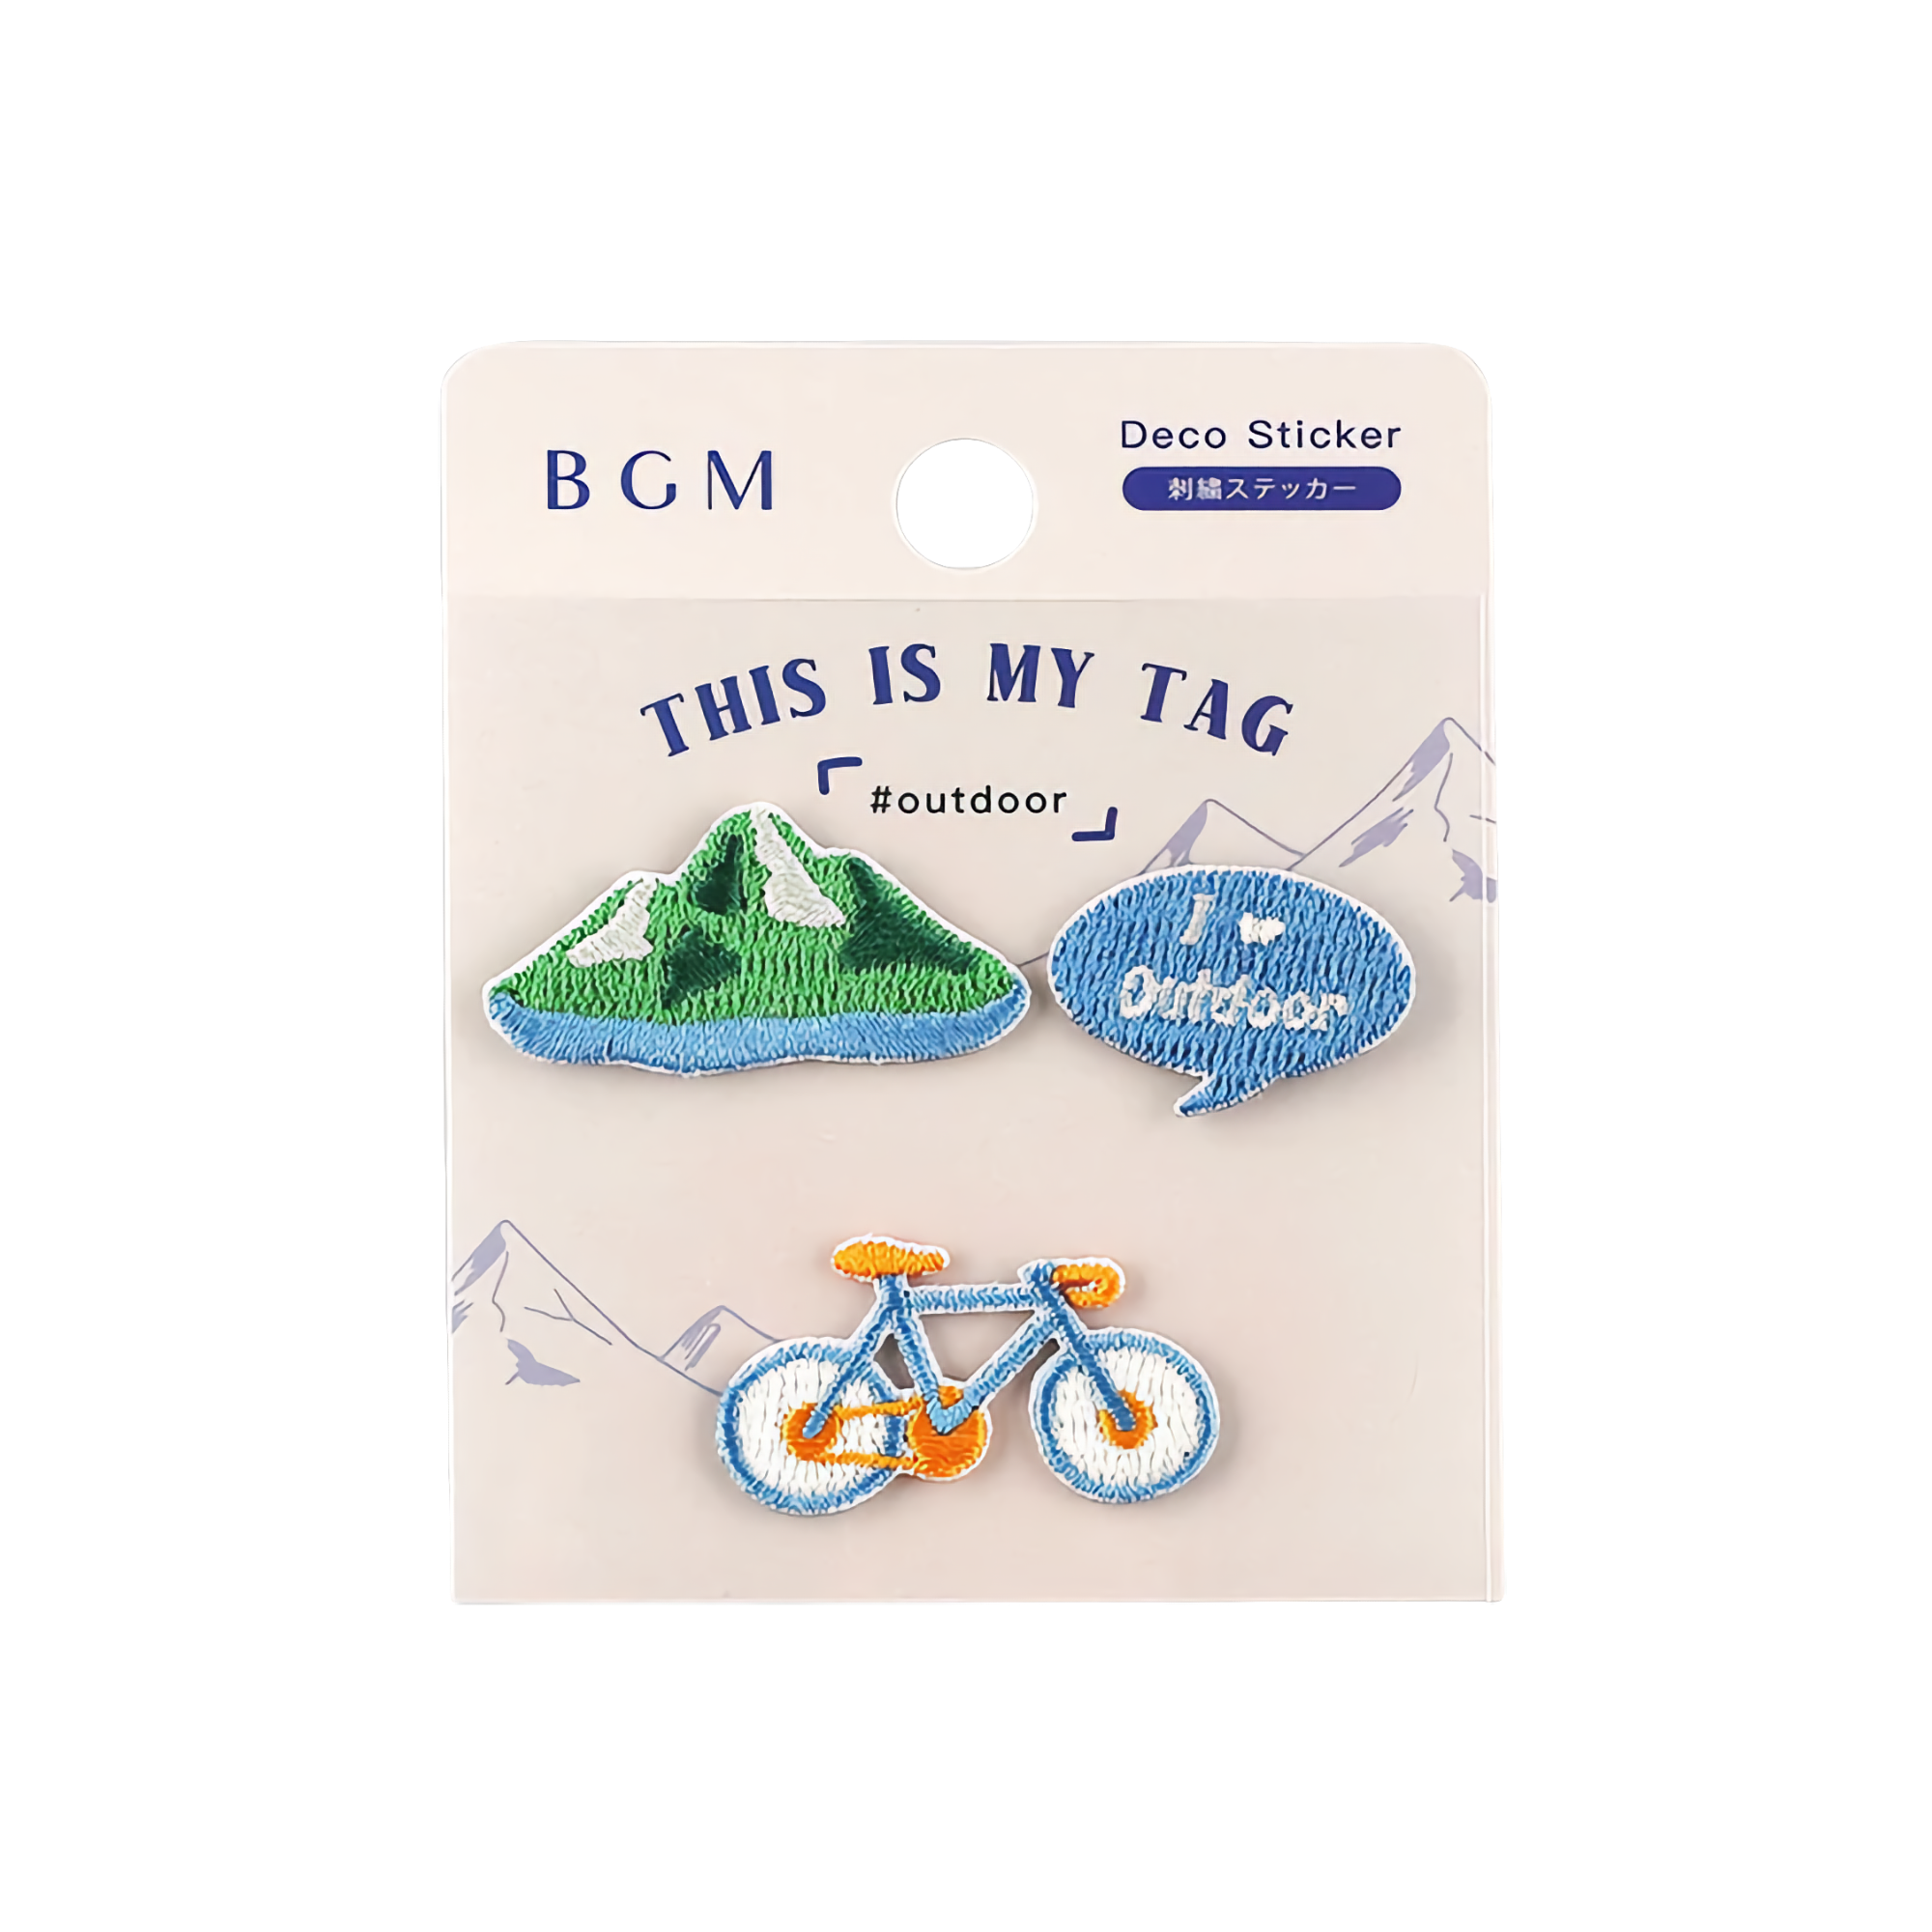 BGM Embroidery Sticker Outdoor